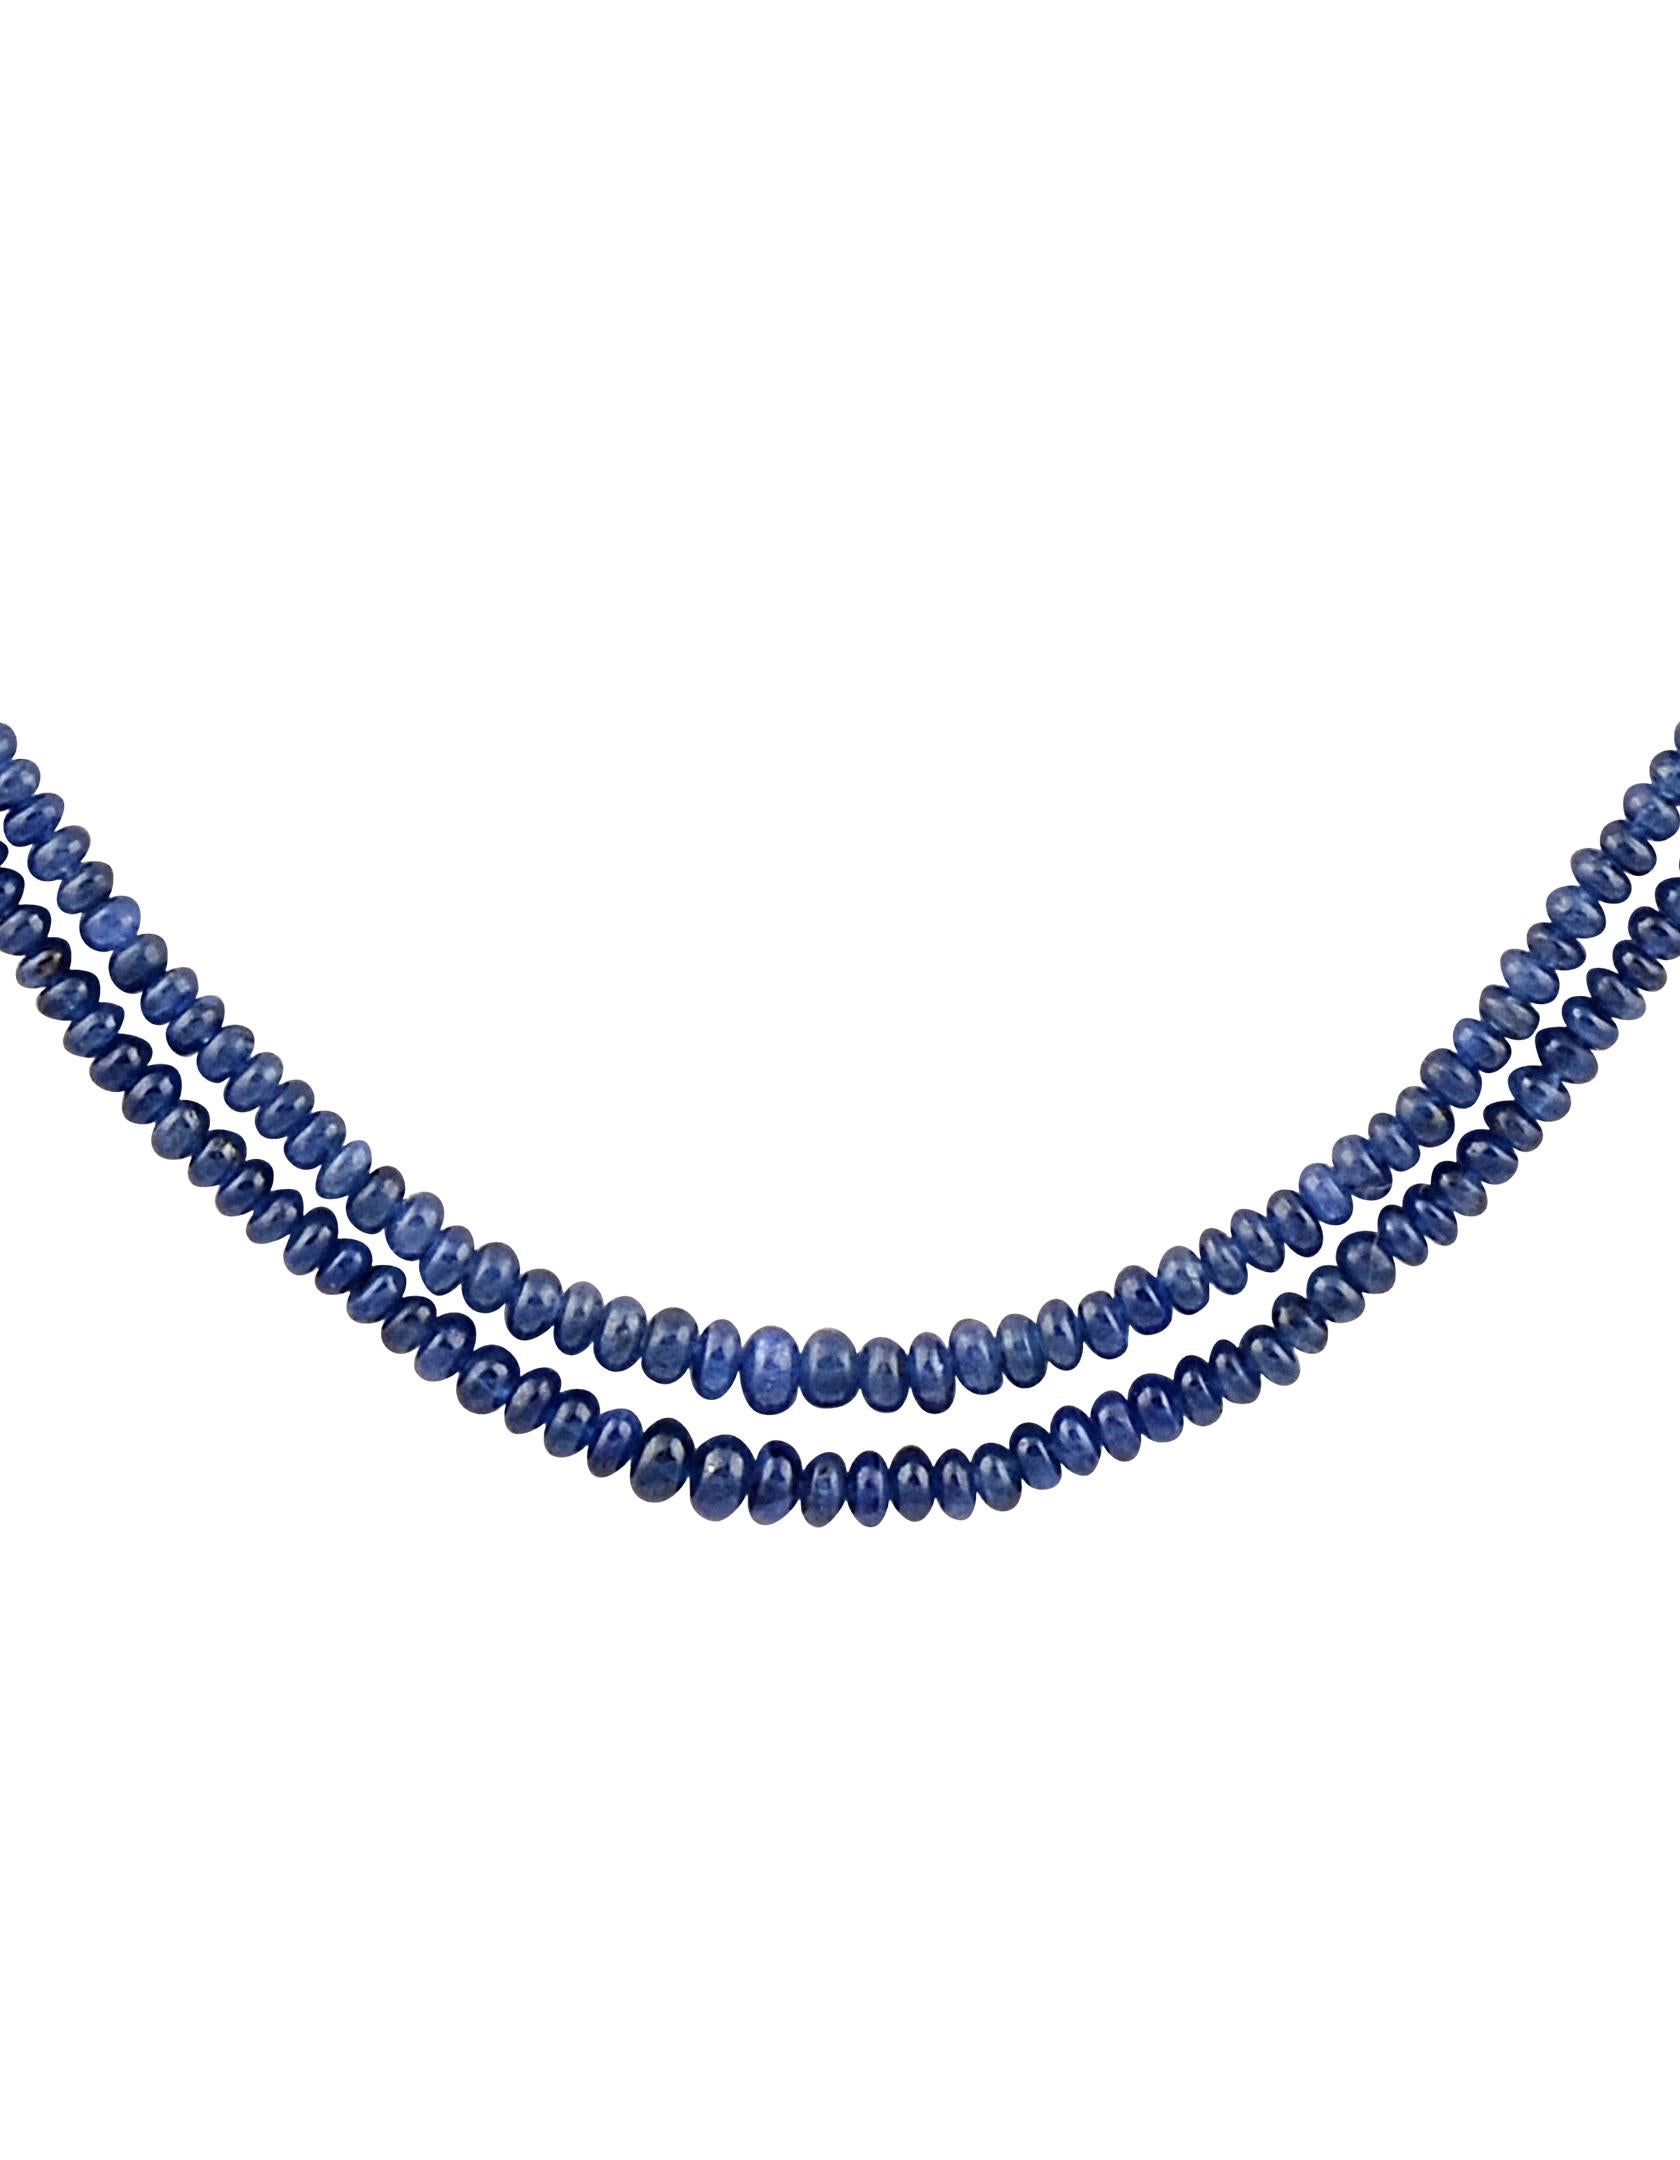 Women's 105 Carat Natural Sapphire Bead Two-Strand Necklace Sterling Silver Clasp For Sale